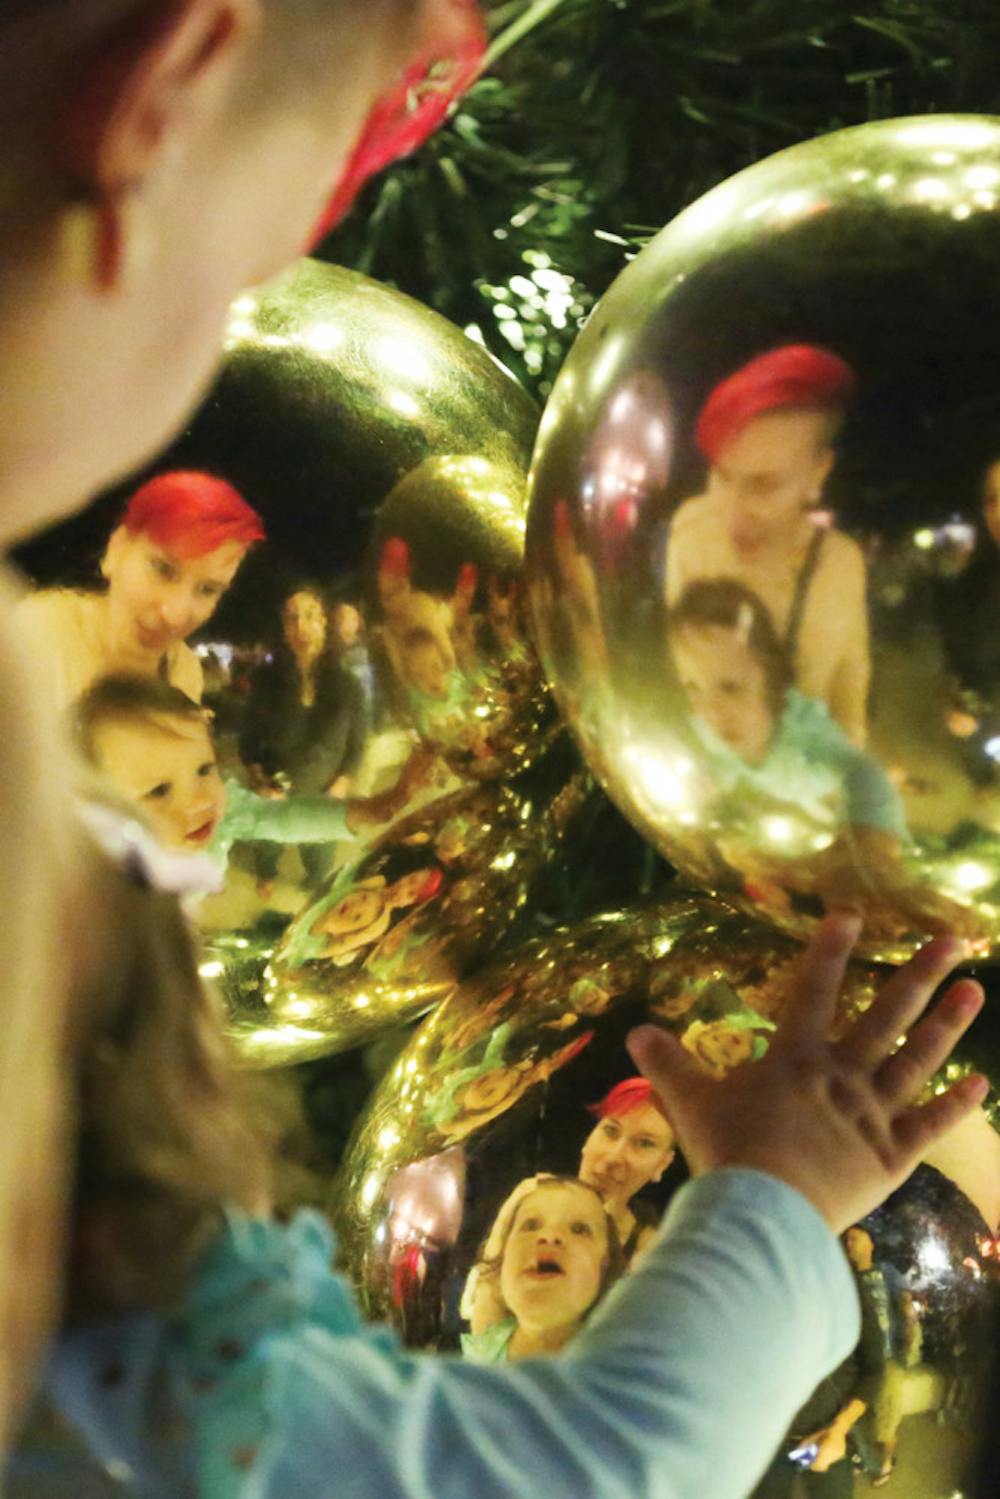 <p>Kelly Anderson, a 30-year-old clinical lab scientist, and Olivia Hamner, 14 months old, look at their reflections on Christmas decorations after the tree lighting ceremony on Nov. 29, 2015.</p>